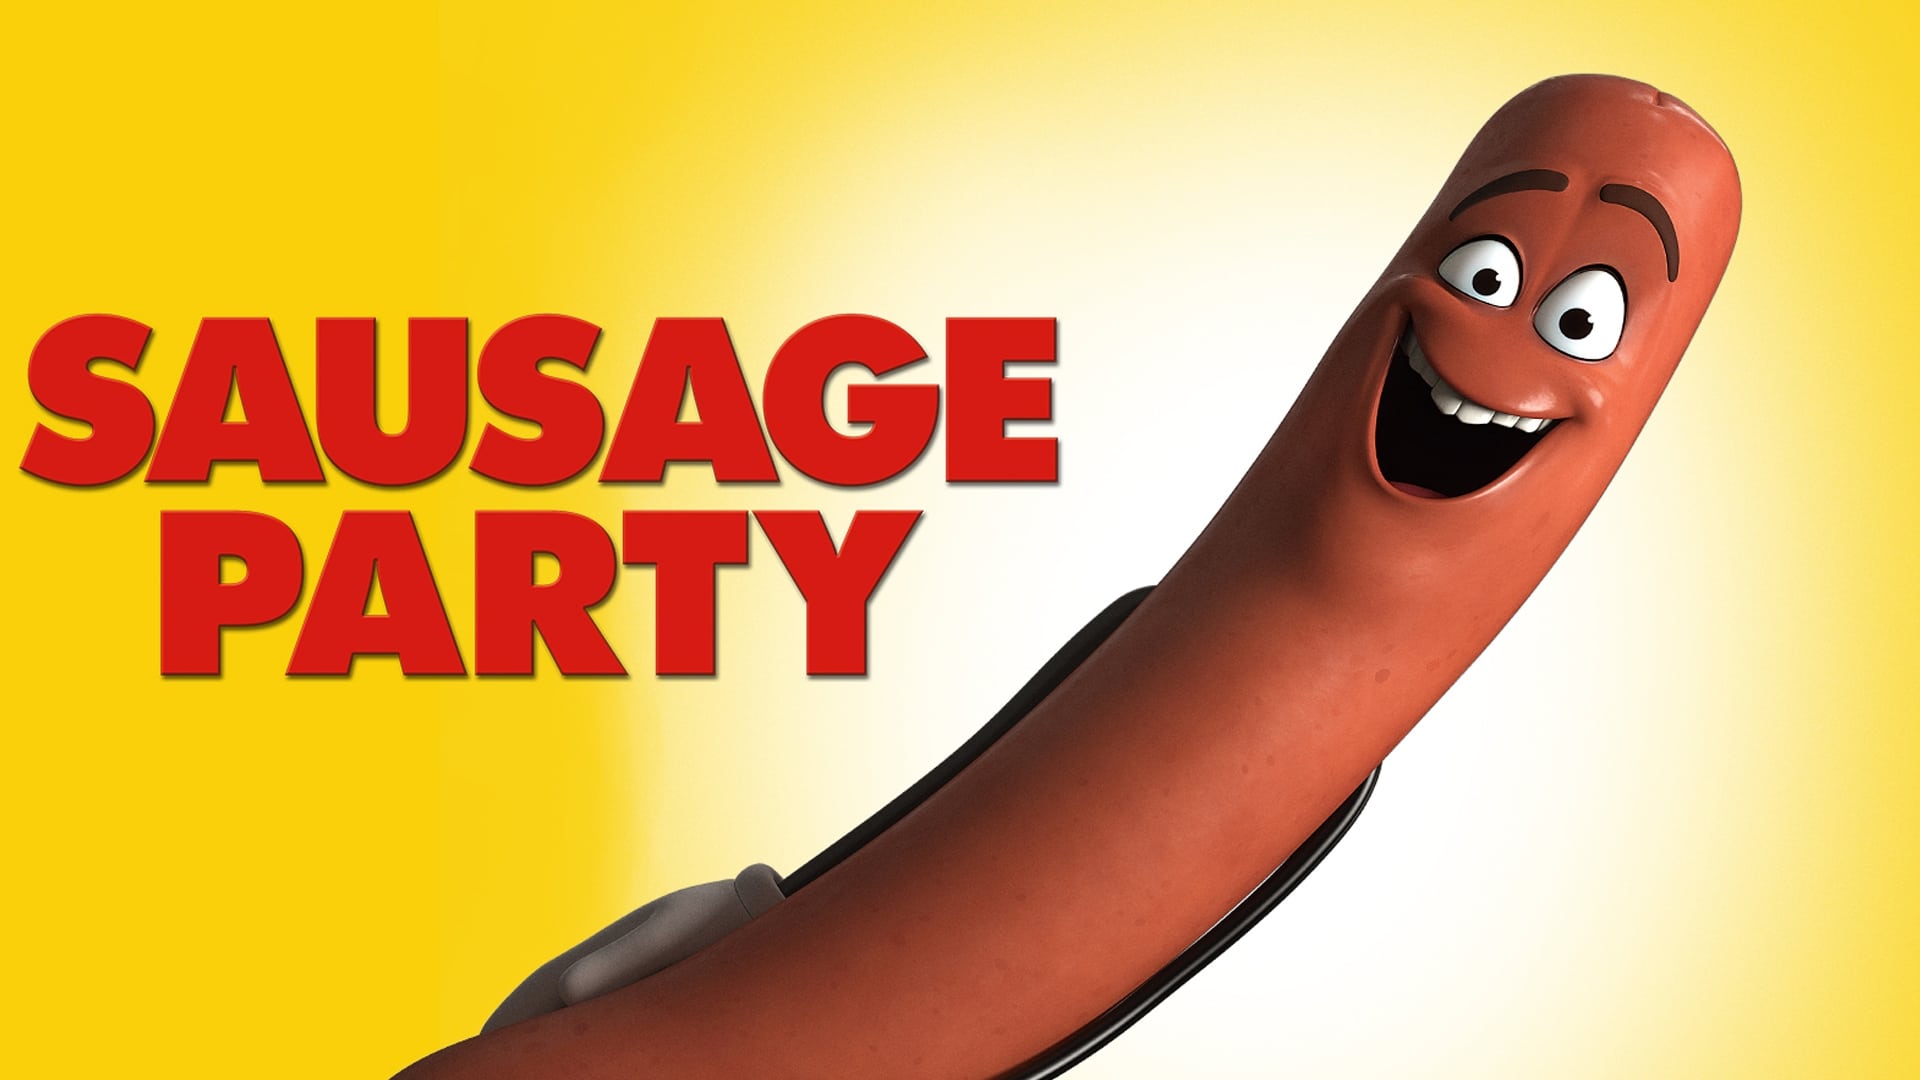 dave stembridge recommends unblocked movies sausage party pic